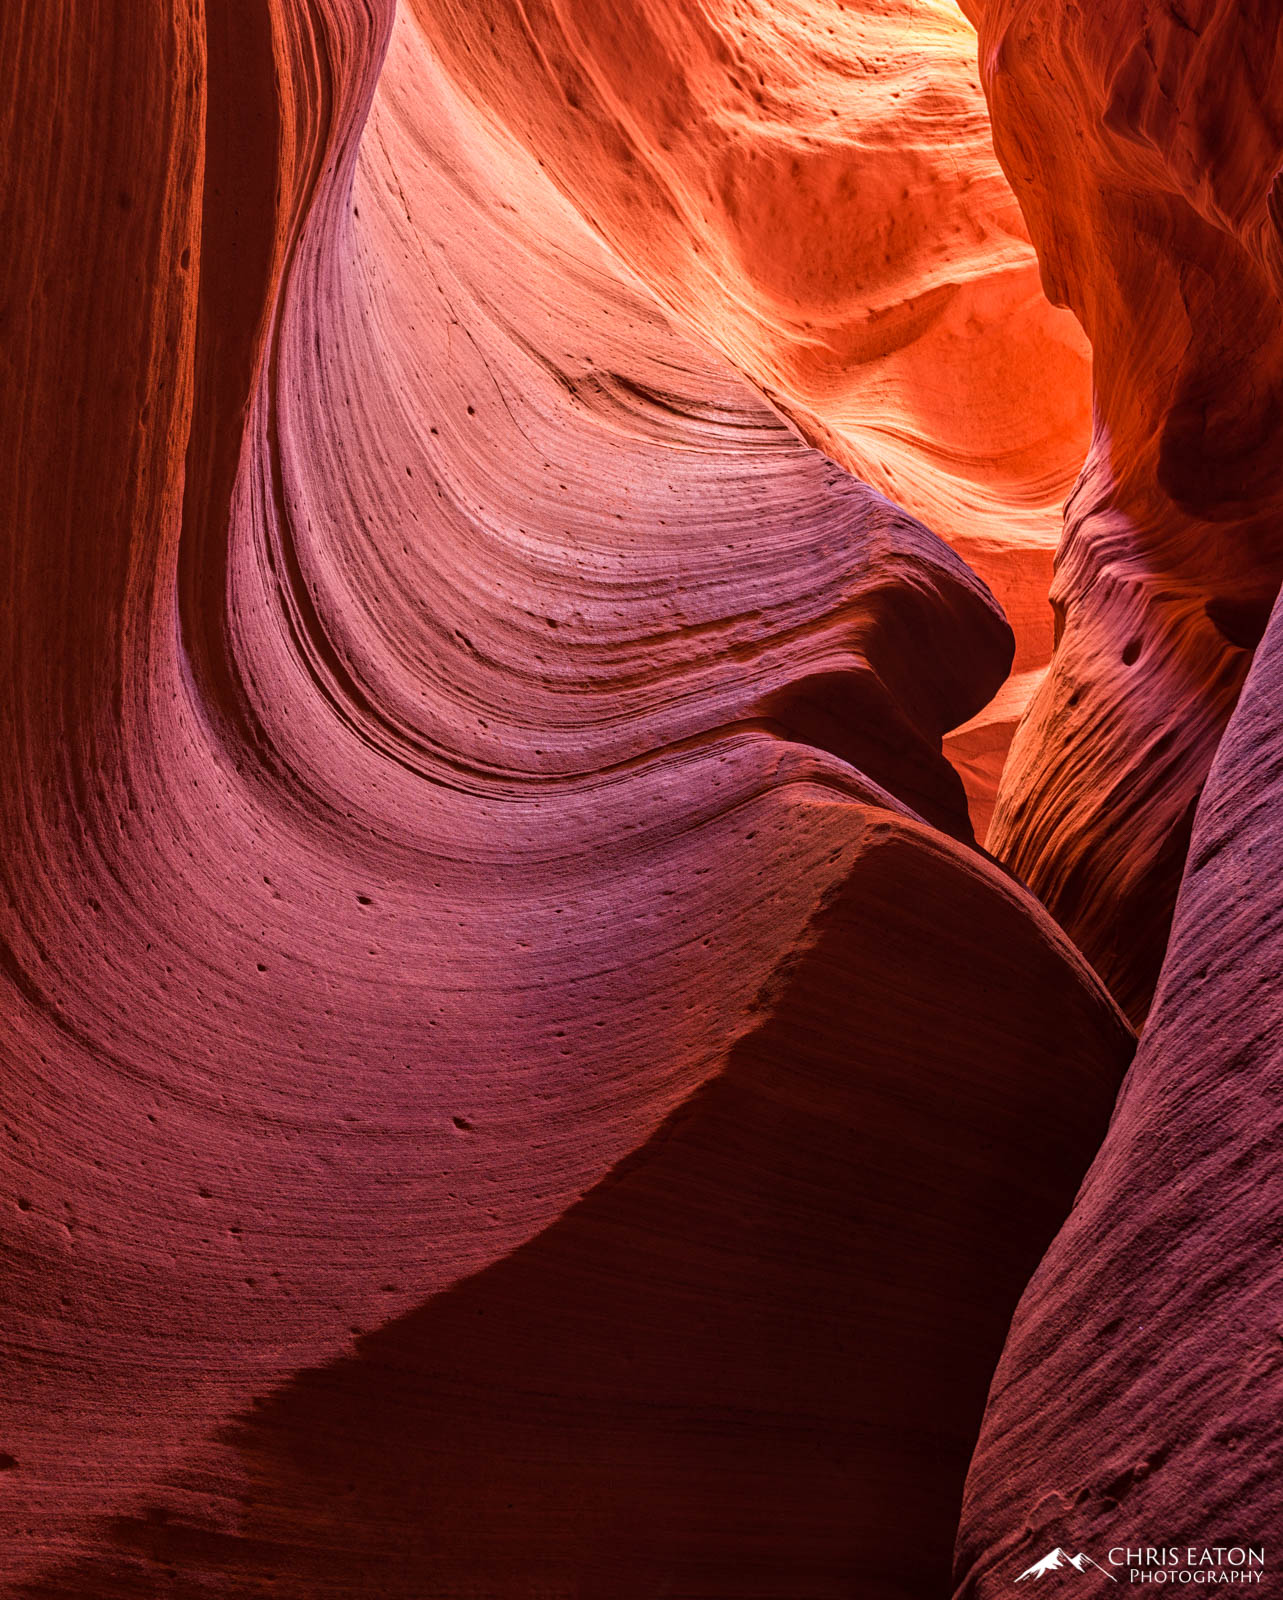 The flash floods that create and sculpt slot canyons, at times unwittingly recreate art. This section of Canyon X features a...